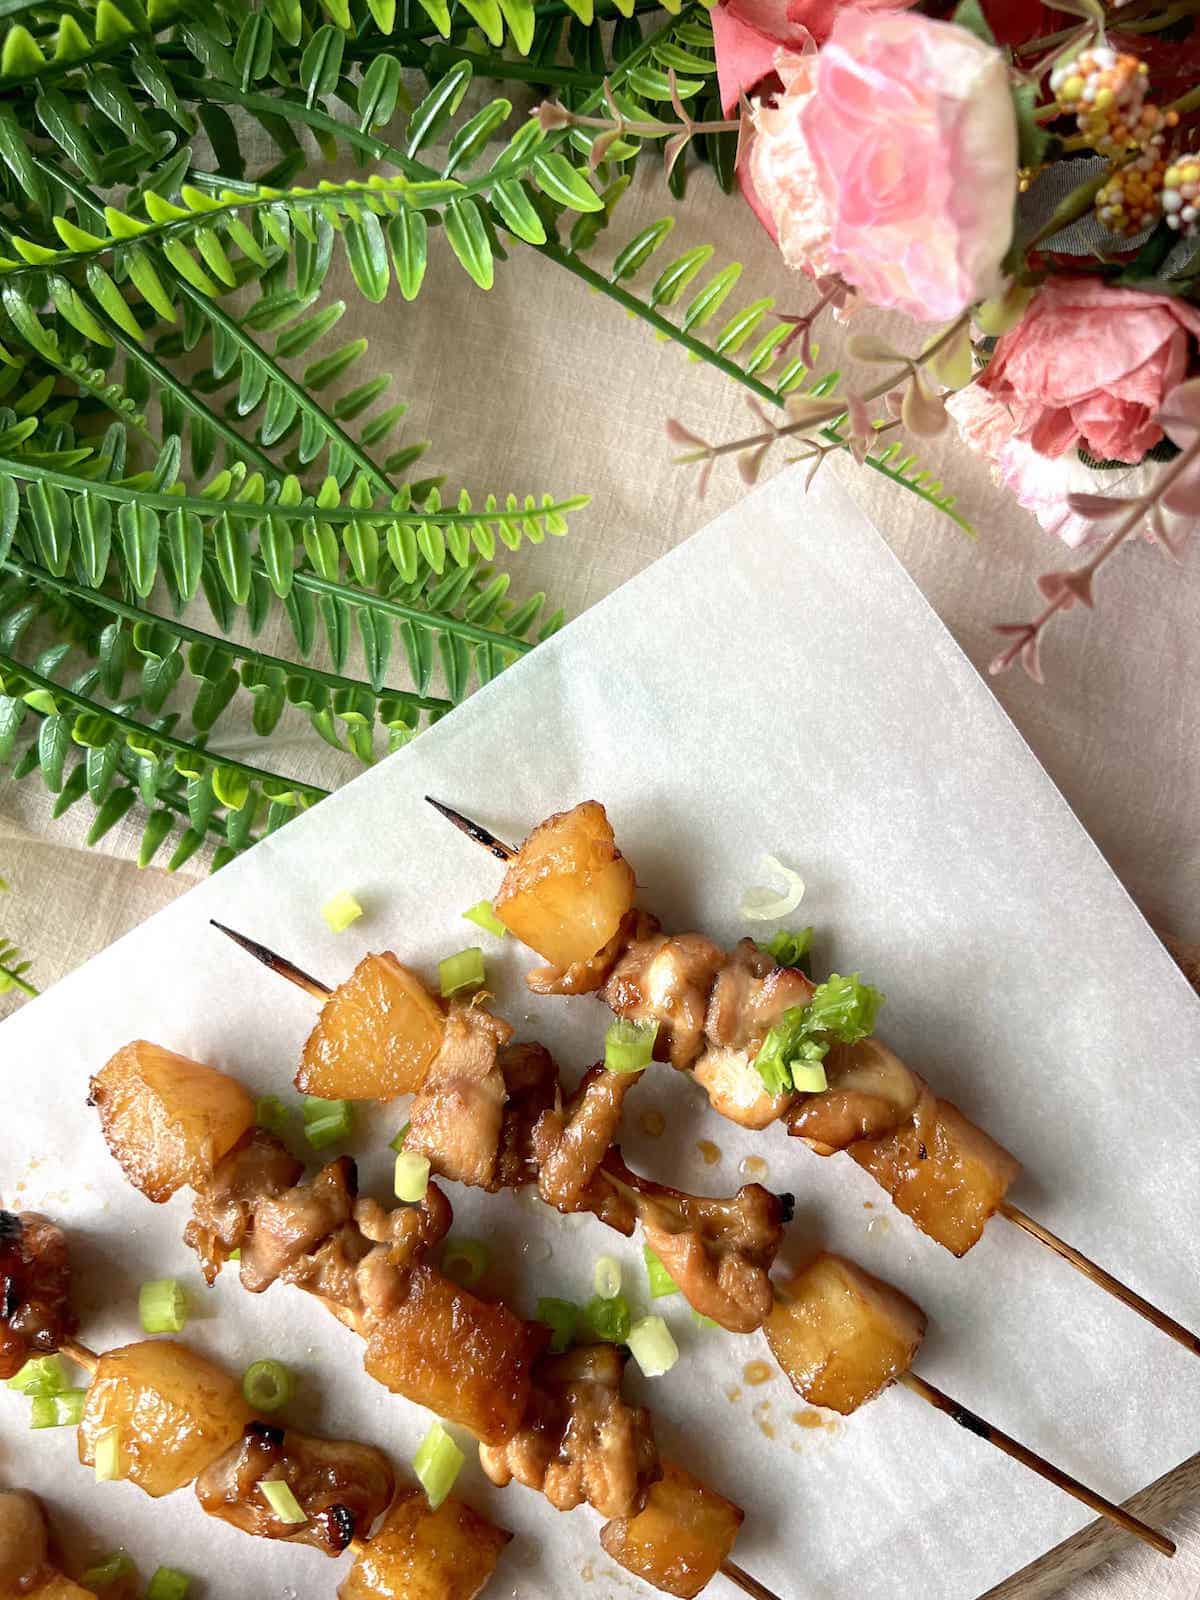 4 chicken teriyaki with pineapple skewers on parchment paper.